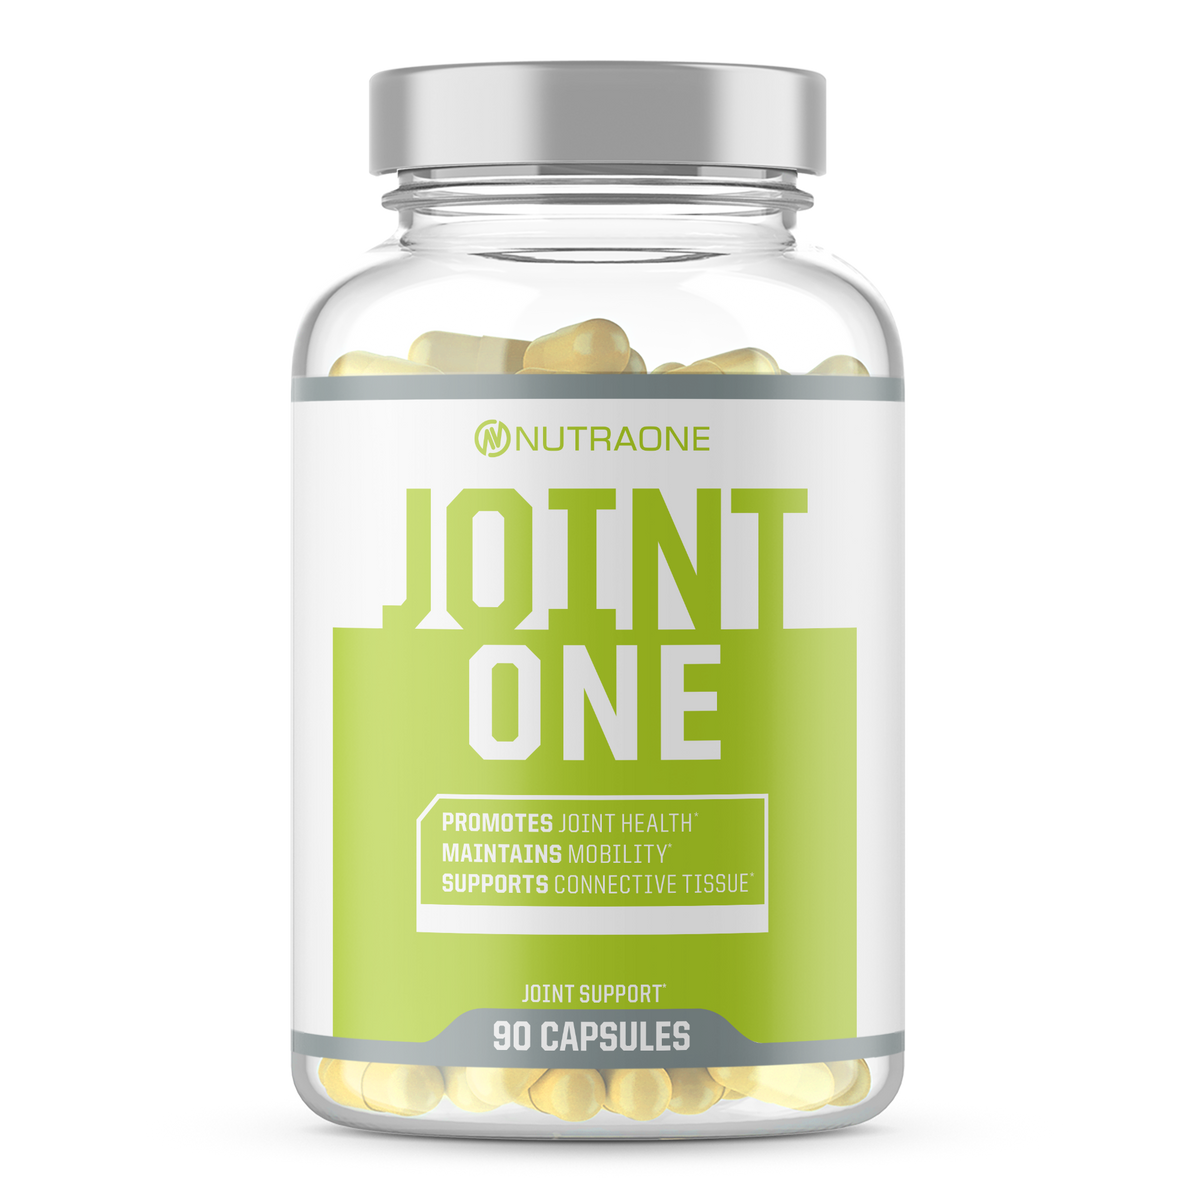 Joint One joint support by nutraone